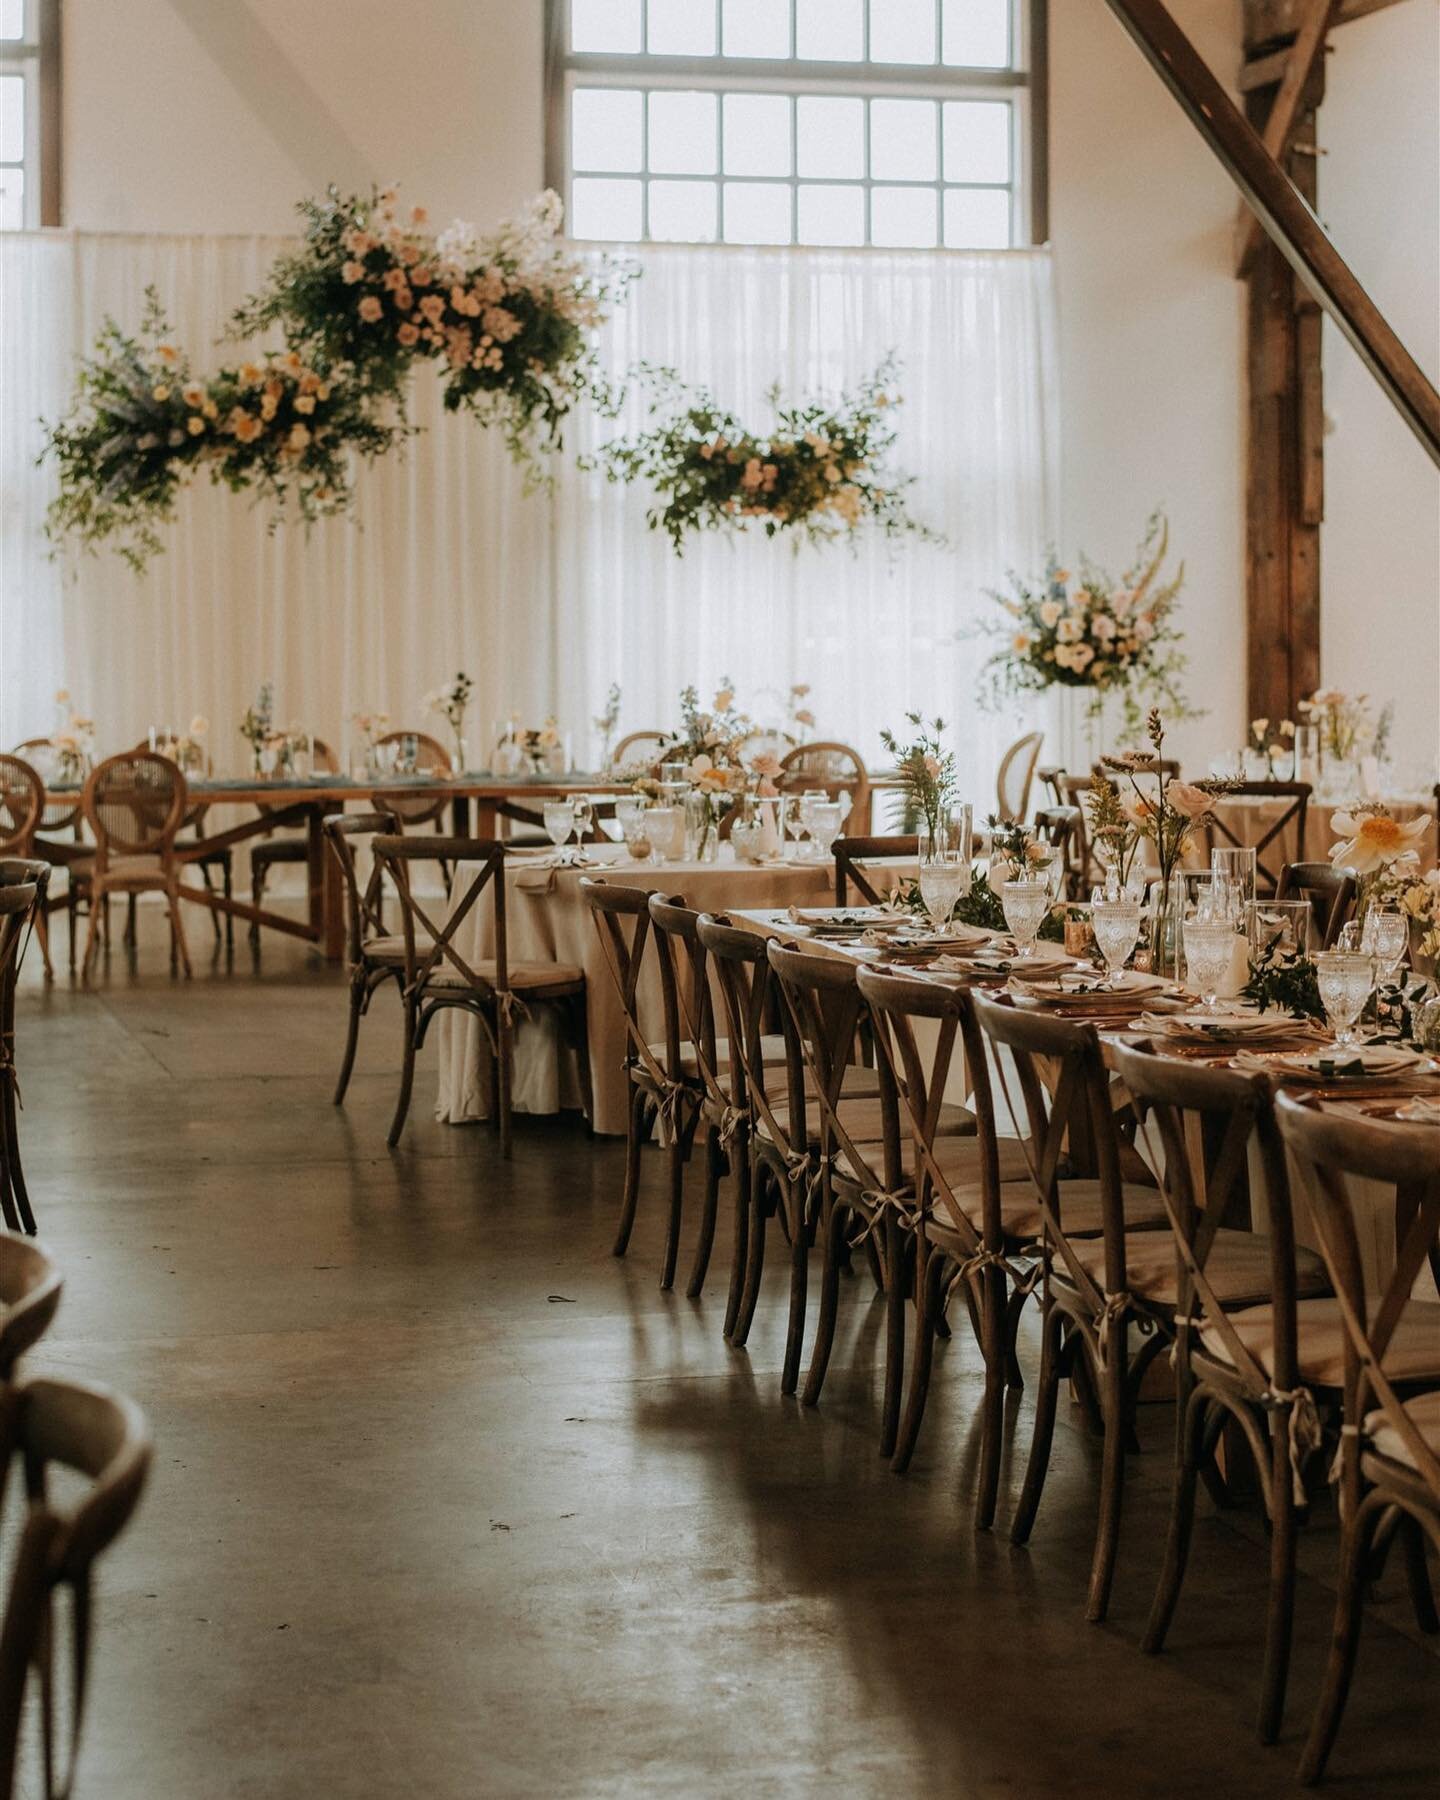 The MOST beautiful spring wedding for D+A at the @pipeshop_venue with florals by @celsiafloral and decor by @bespokedecor 🌸 This was actually venue two for this special day&mdash;stay tuned for more from this wedding soon!

Photography @sararogersph